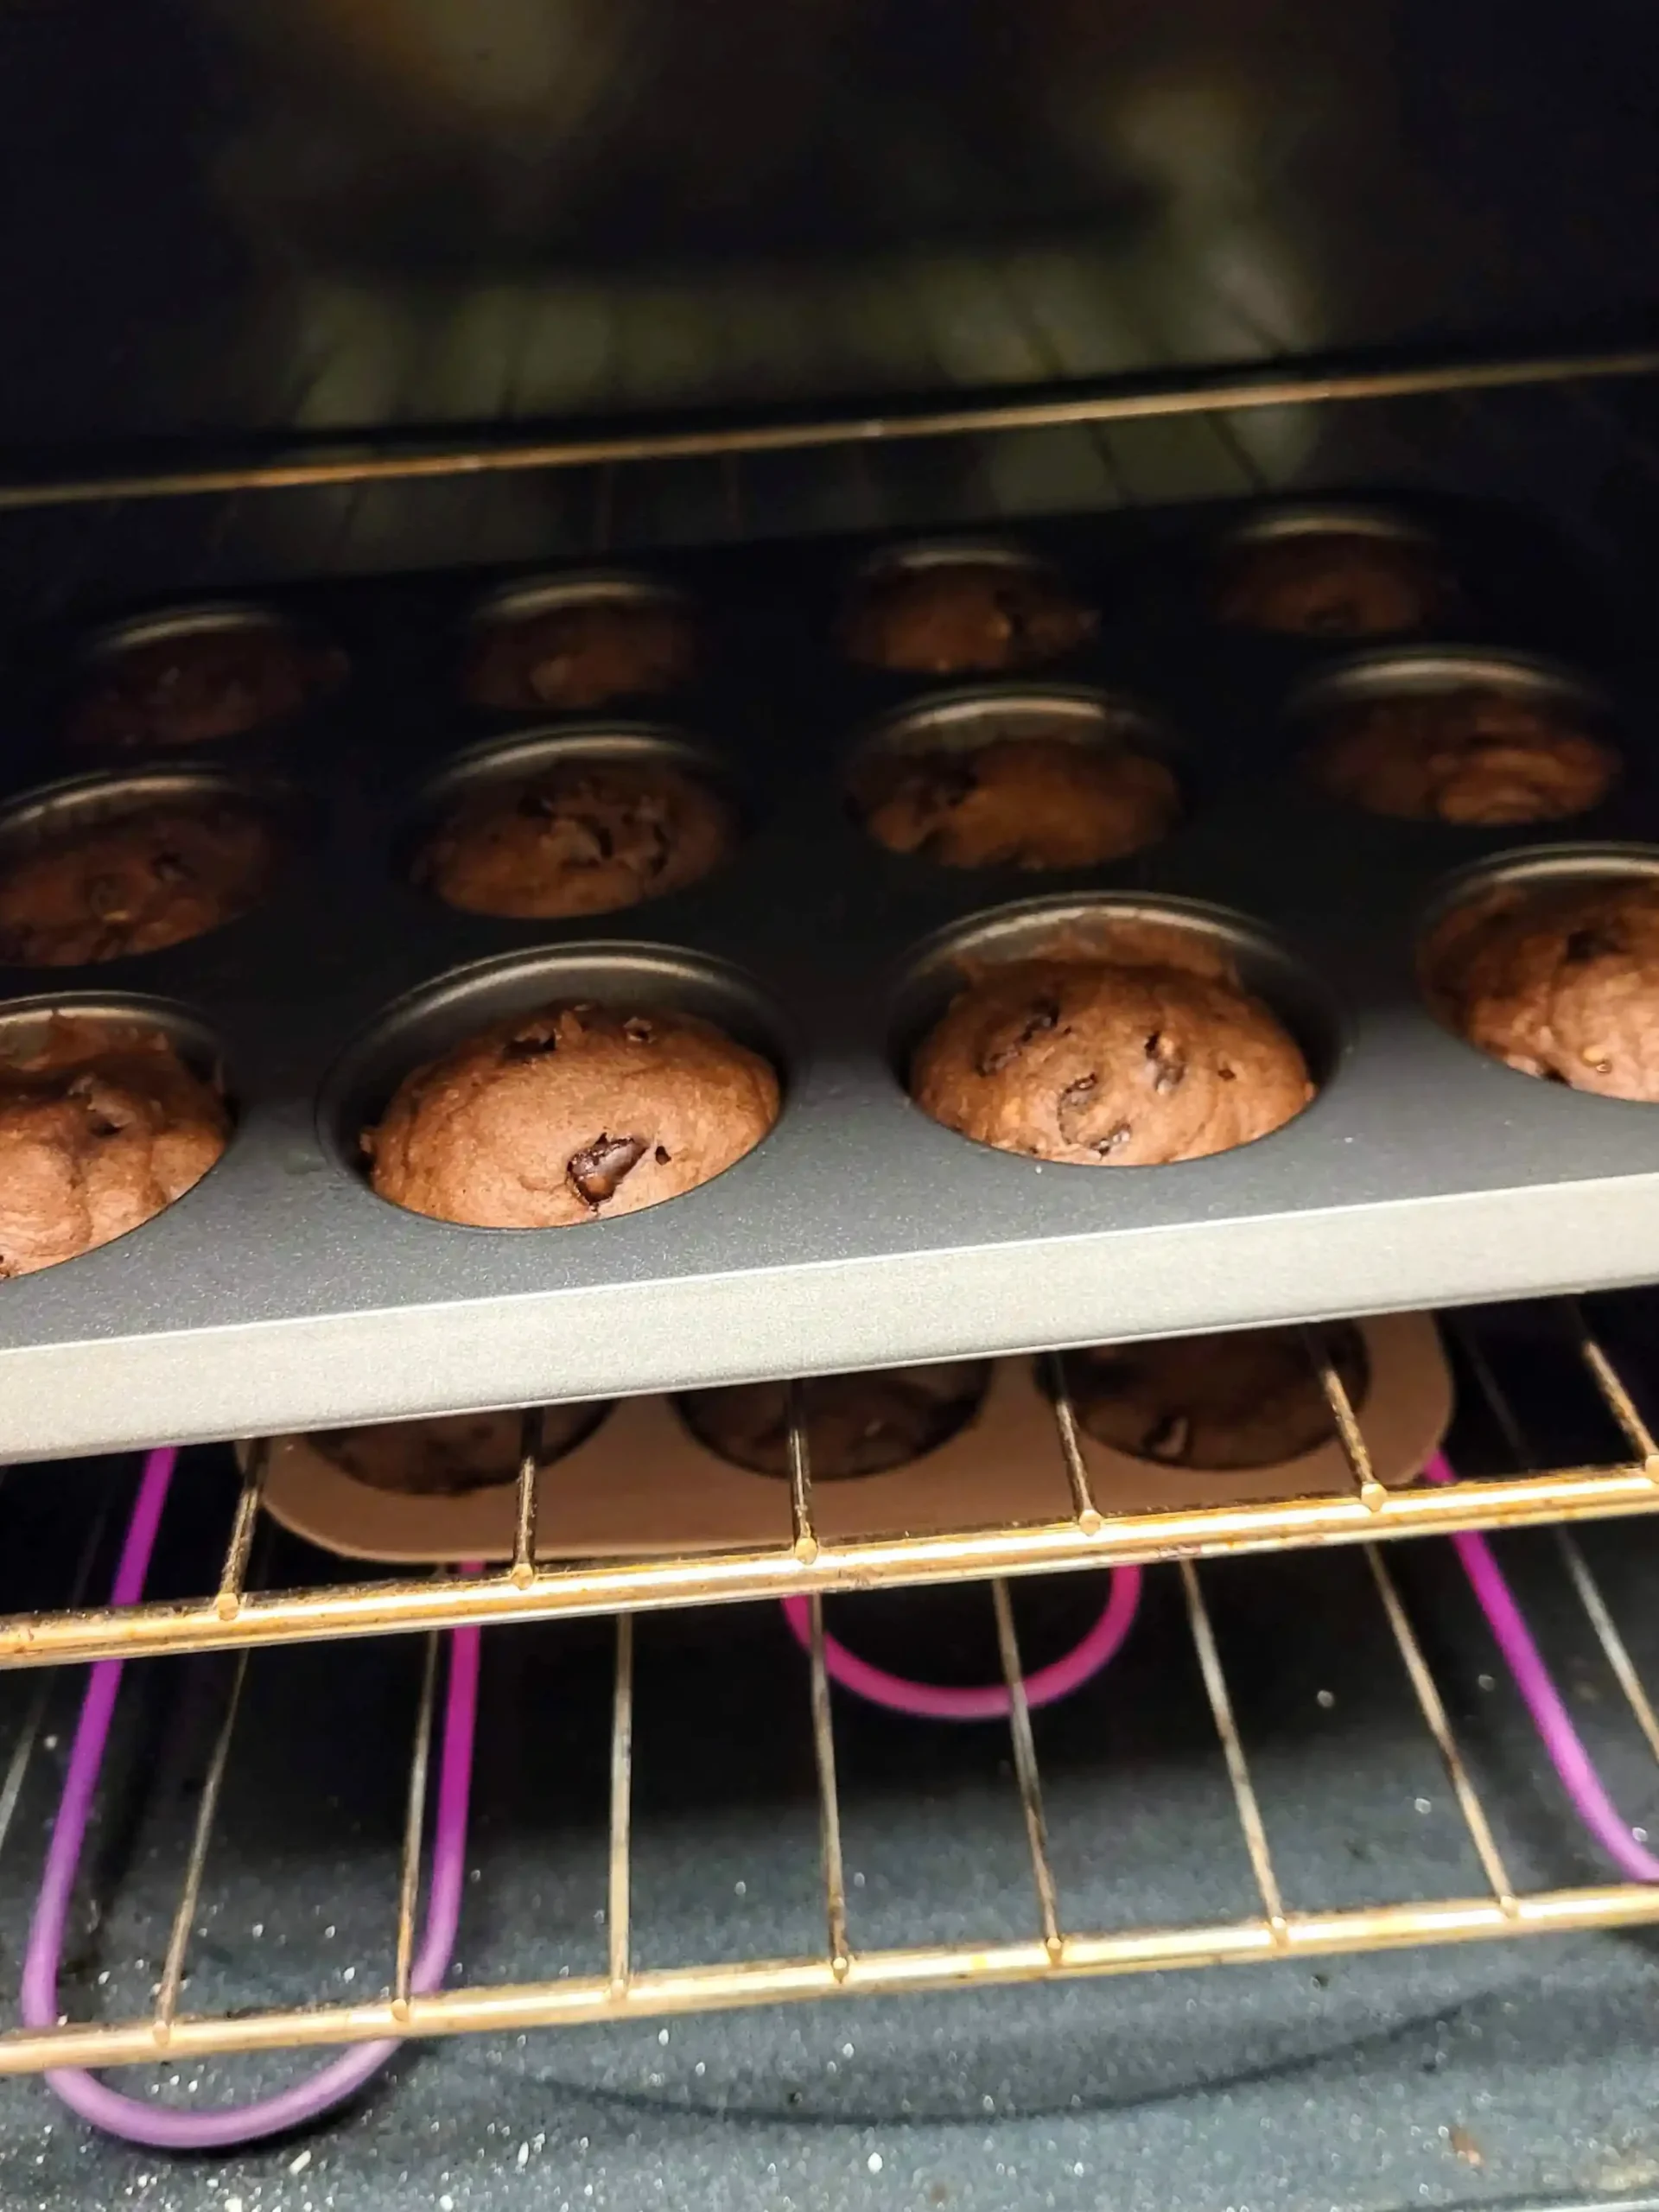 double fudge banana muffins cooking in oven.